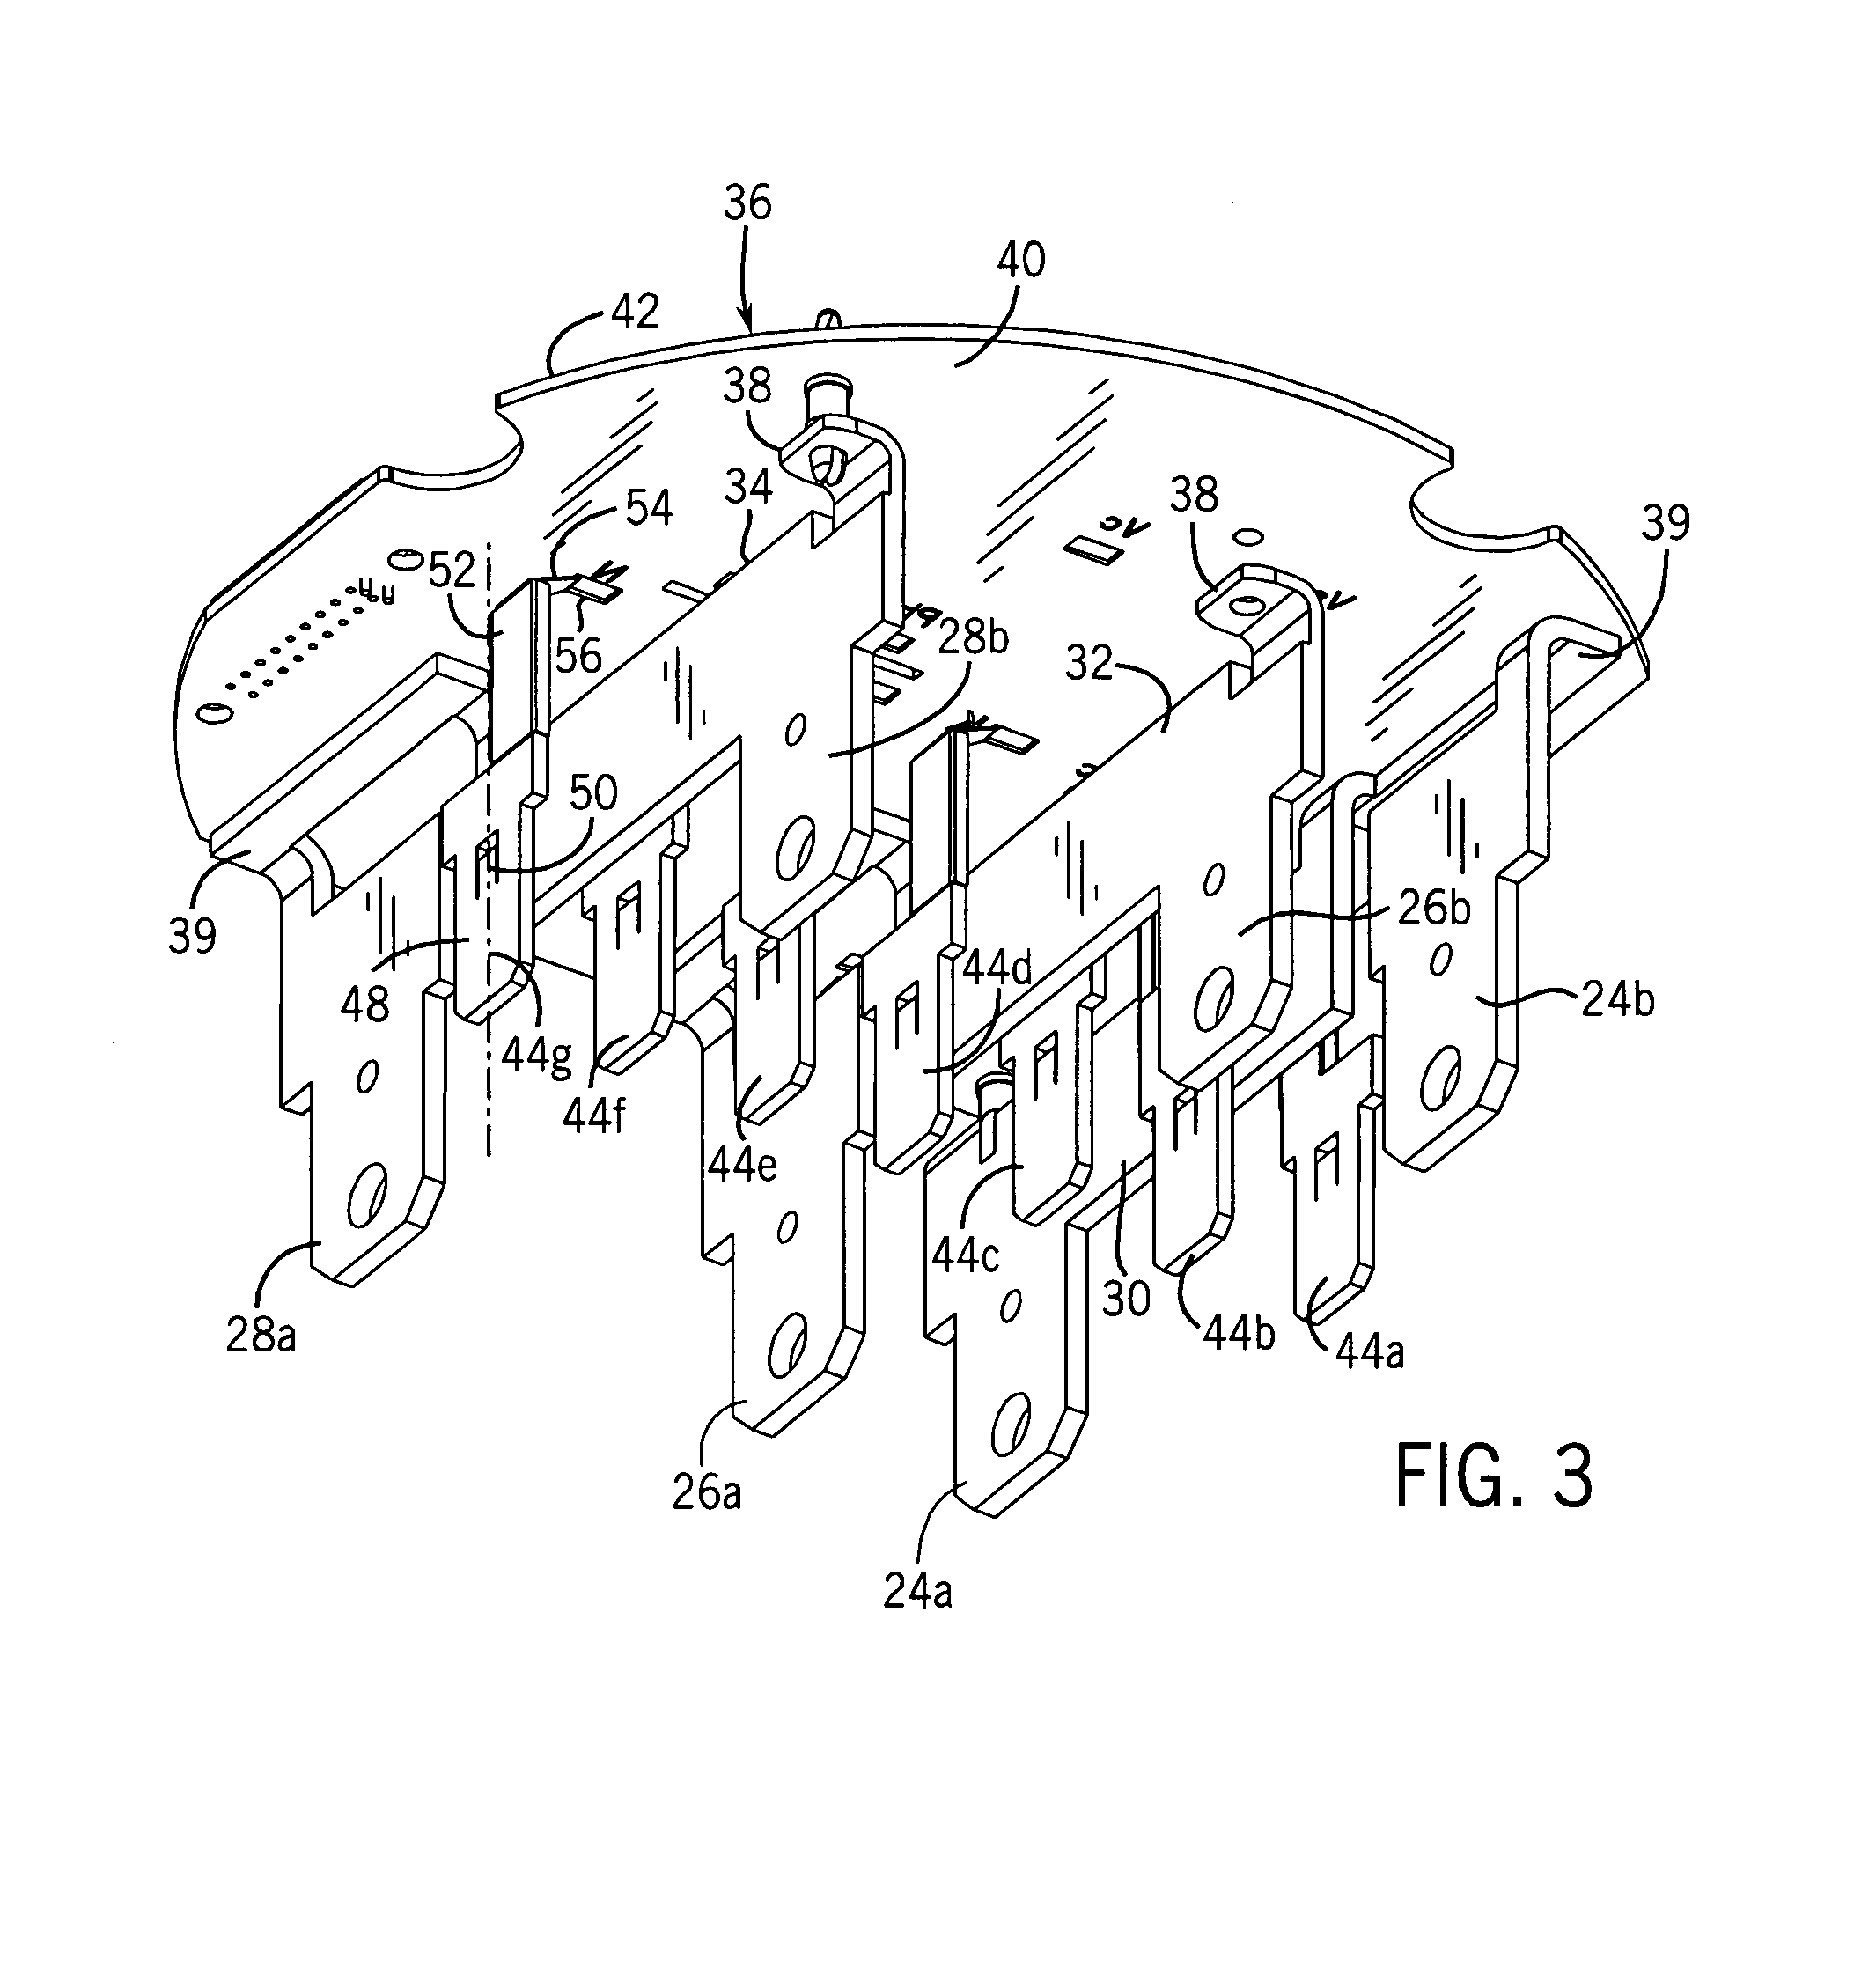 Electronic electricity meter having configurable contacts